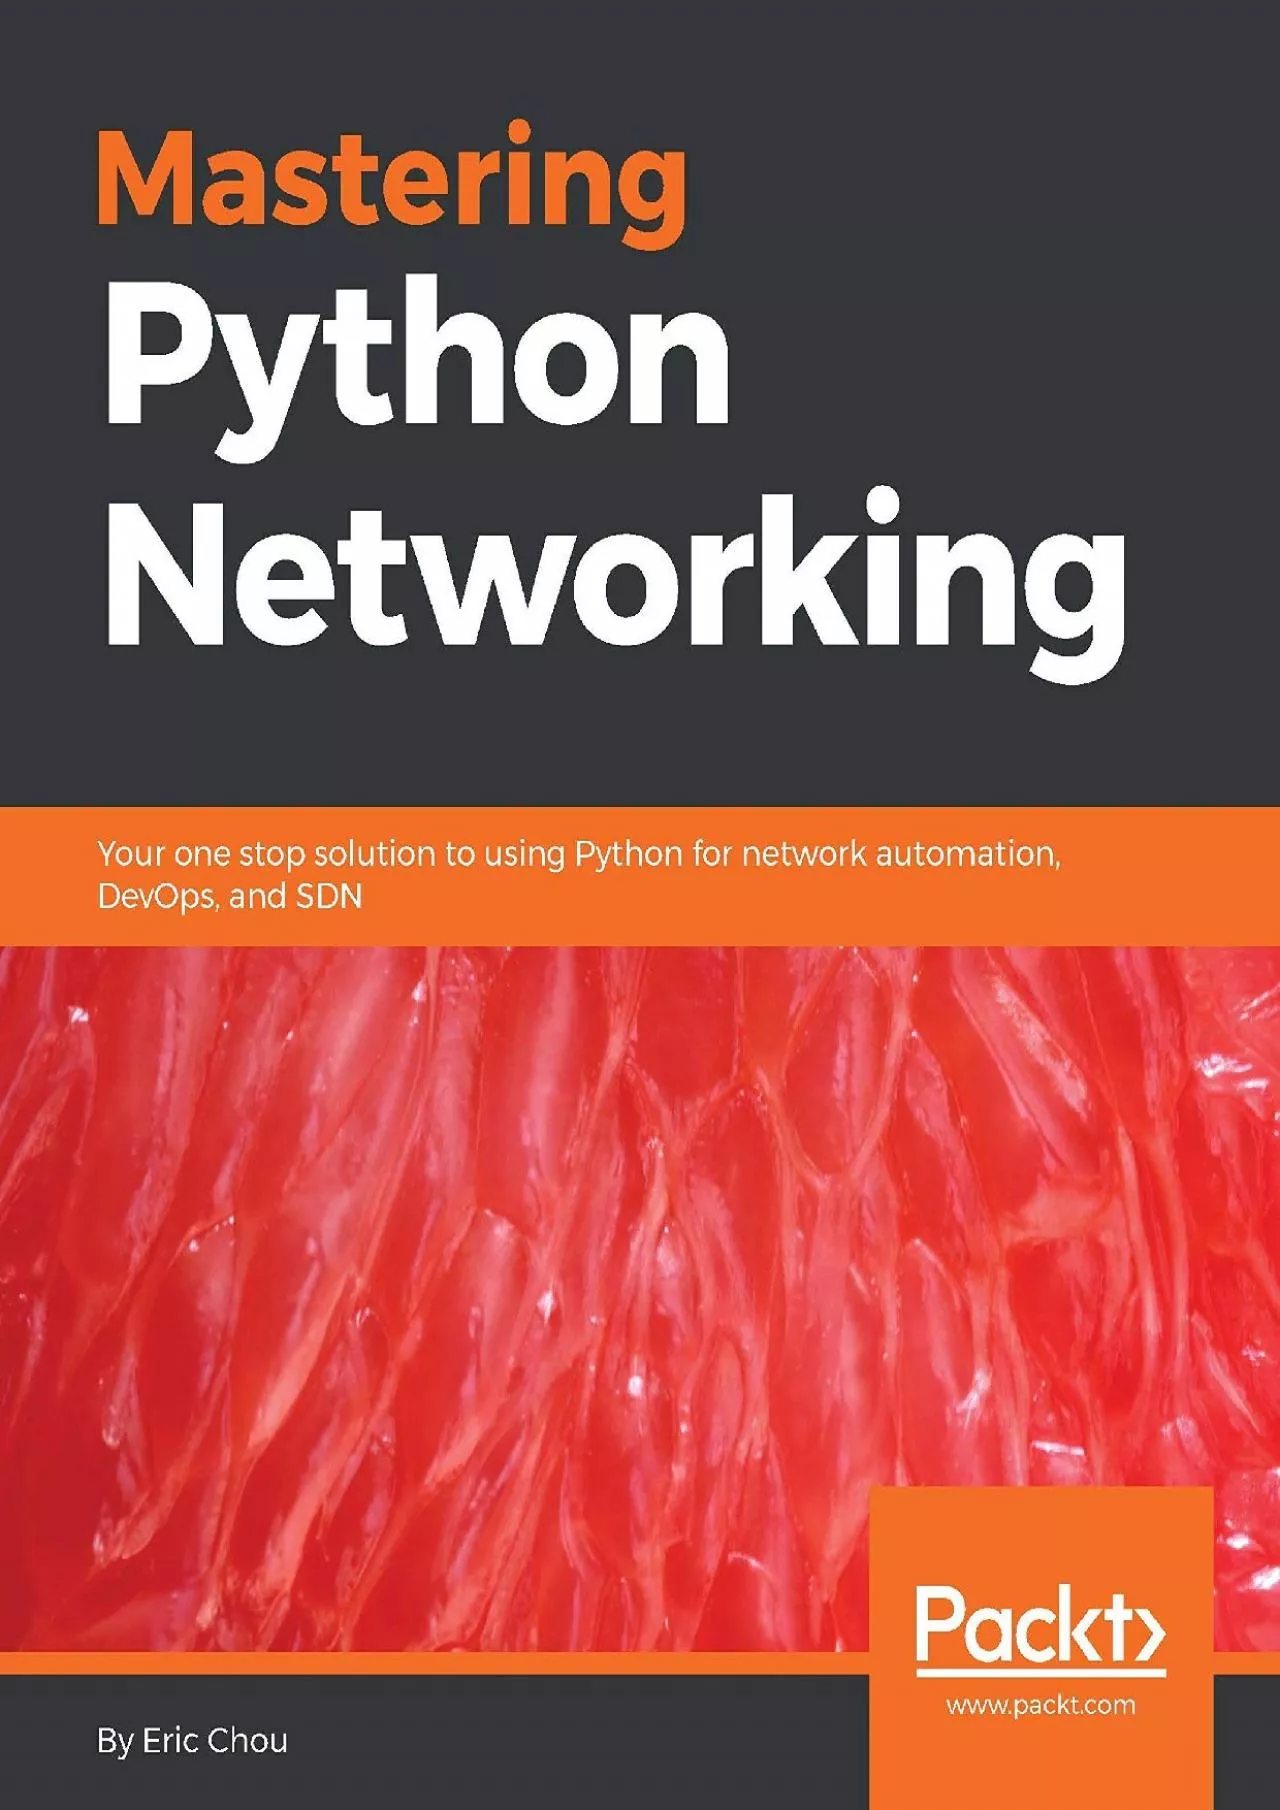 [FREE]-Mastering Python Networking: Your one stop solution to using Python for network